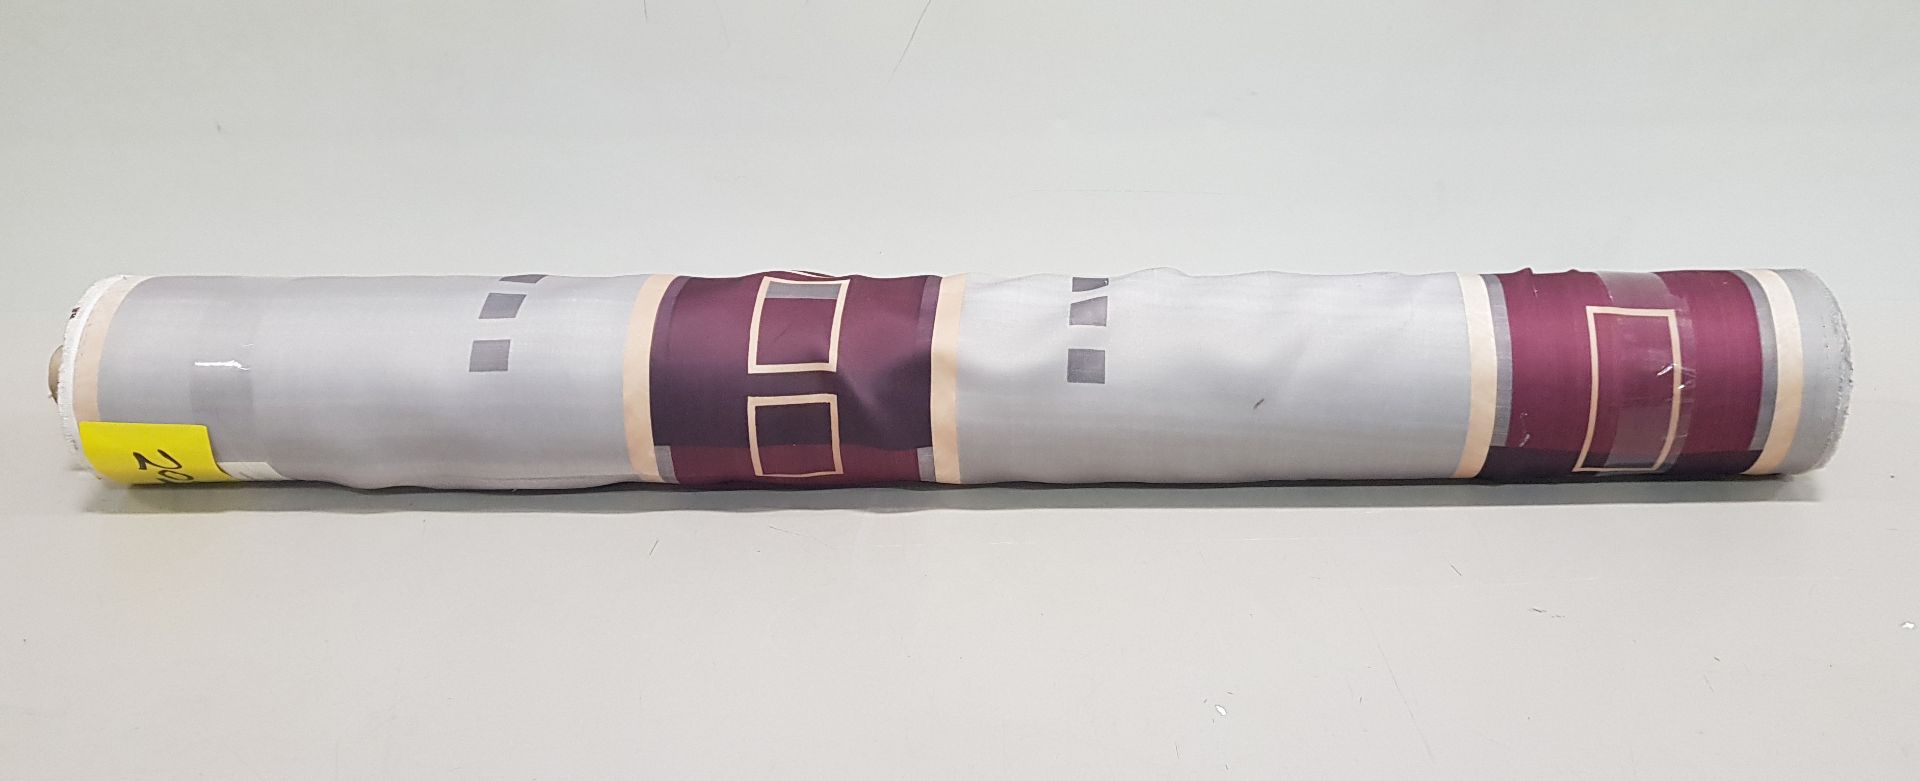 1 X ROLL OF FABRIC IN GREY AND RED SQUARE BOXE'S DESIGN - THE LENGTH 36M - £12.99 / M - TOTAL £467.